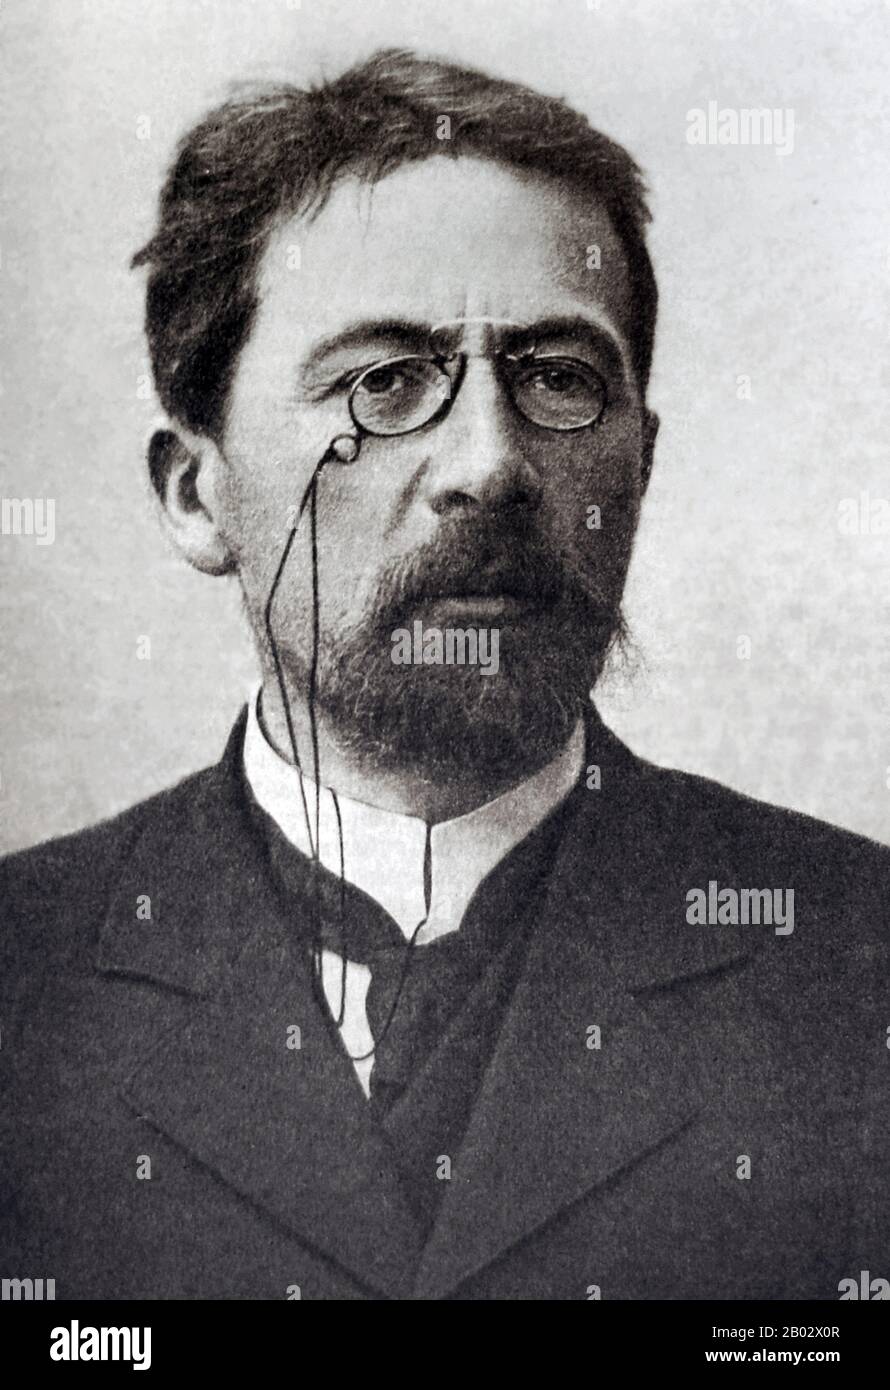 Anton Pavlovich Chekhov (29 January 1860 – 15 July 1904) was a Russian physician, playwright and author who is considered to be among the greatest writers of short stories in history. His career as a playwright produced four classics and his best short stories are held in high esteem by writers and critics.  Chekhov practiced as a medical doctor throughout most of his literary career: 'Medicine is my lawful wife', he once said, 'and literature is my mistress'. Along with Henrik Ibsen and August Strindberg, Chekhov is often referred to as one of the three seminal figures in the birth of early m Stock Photo